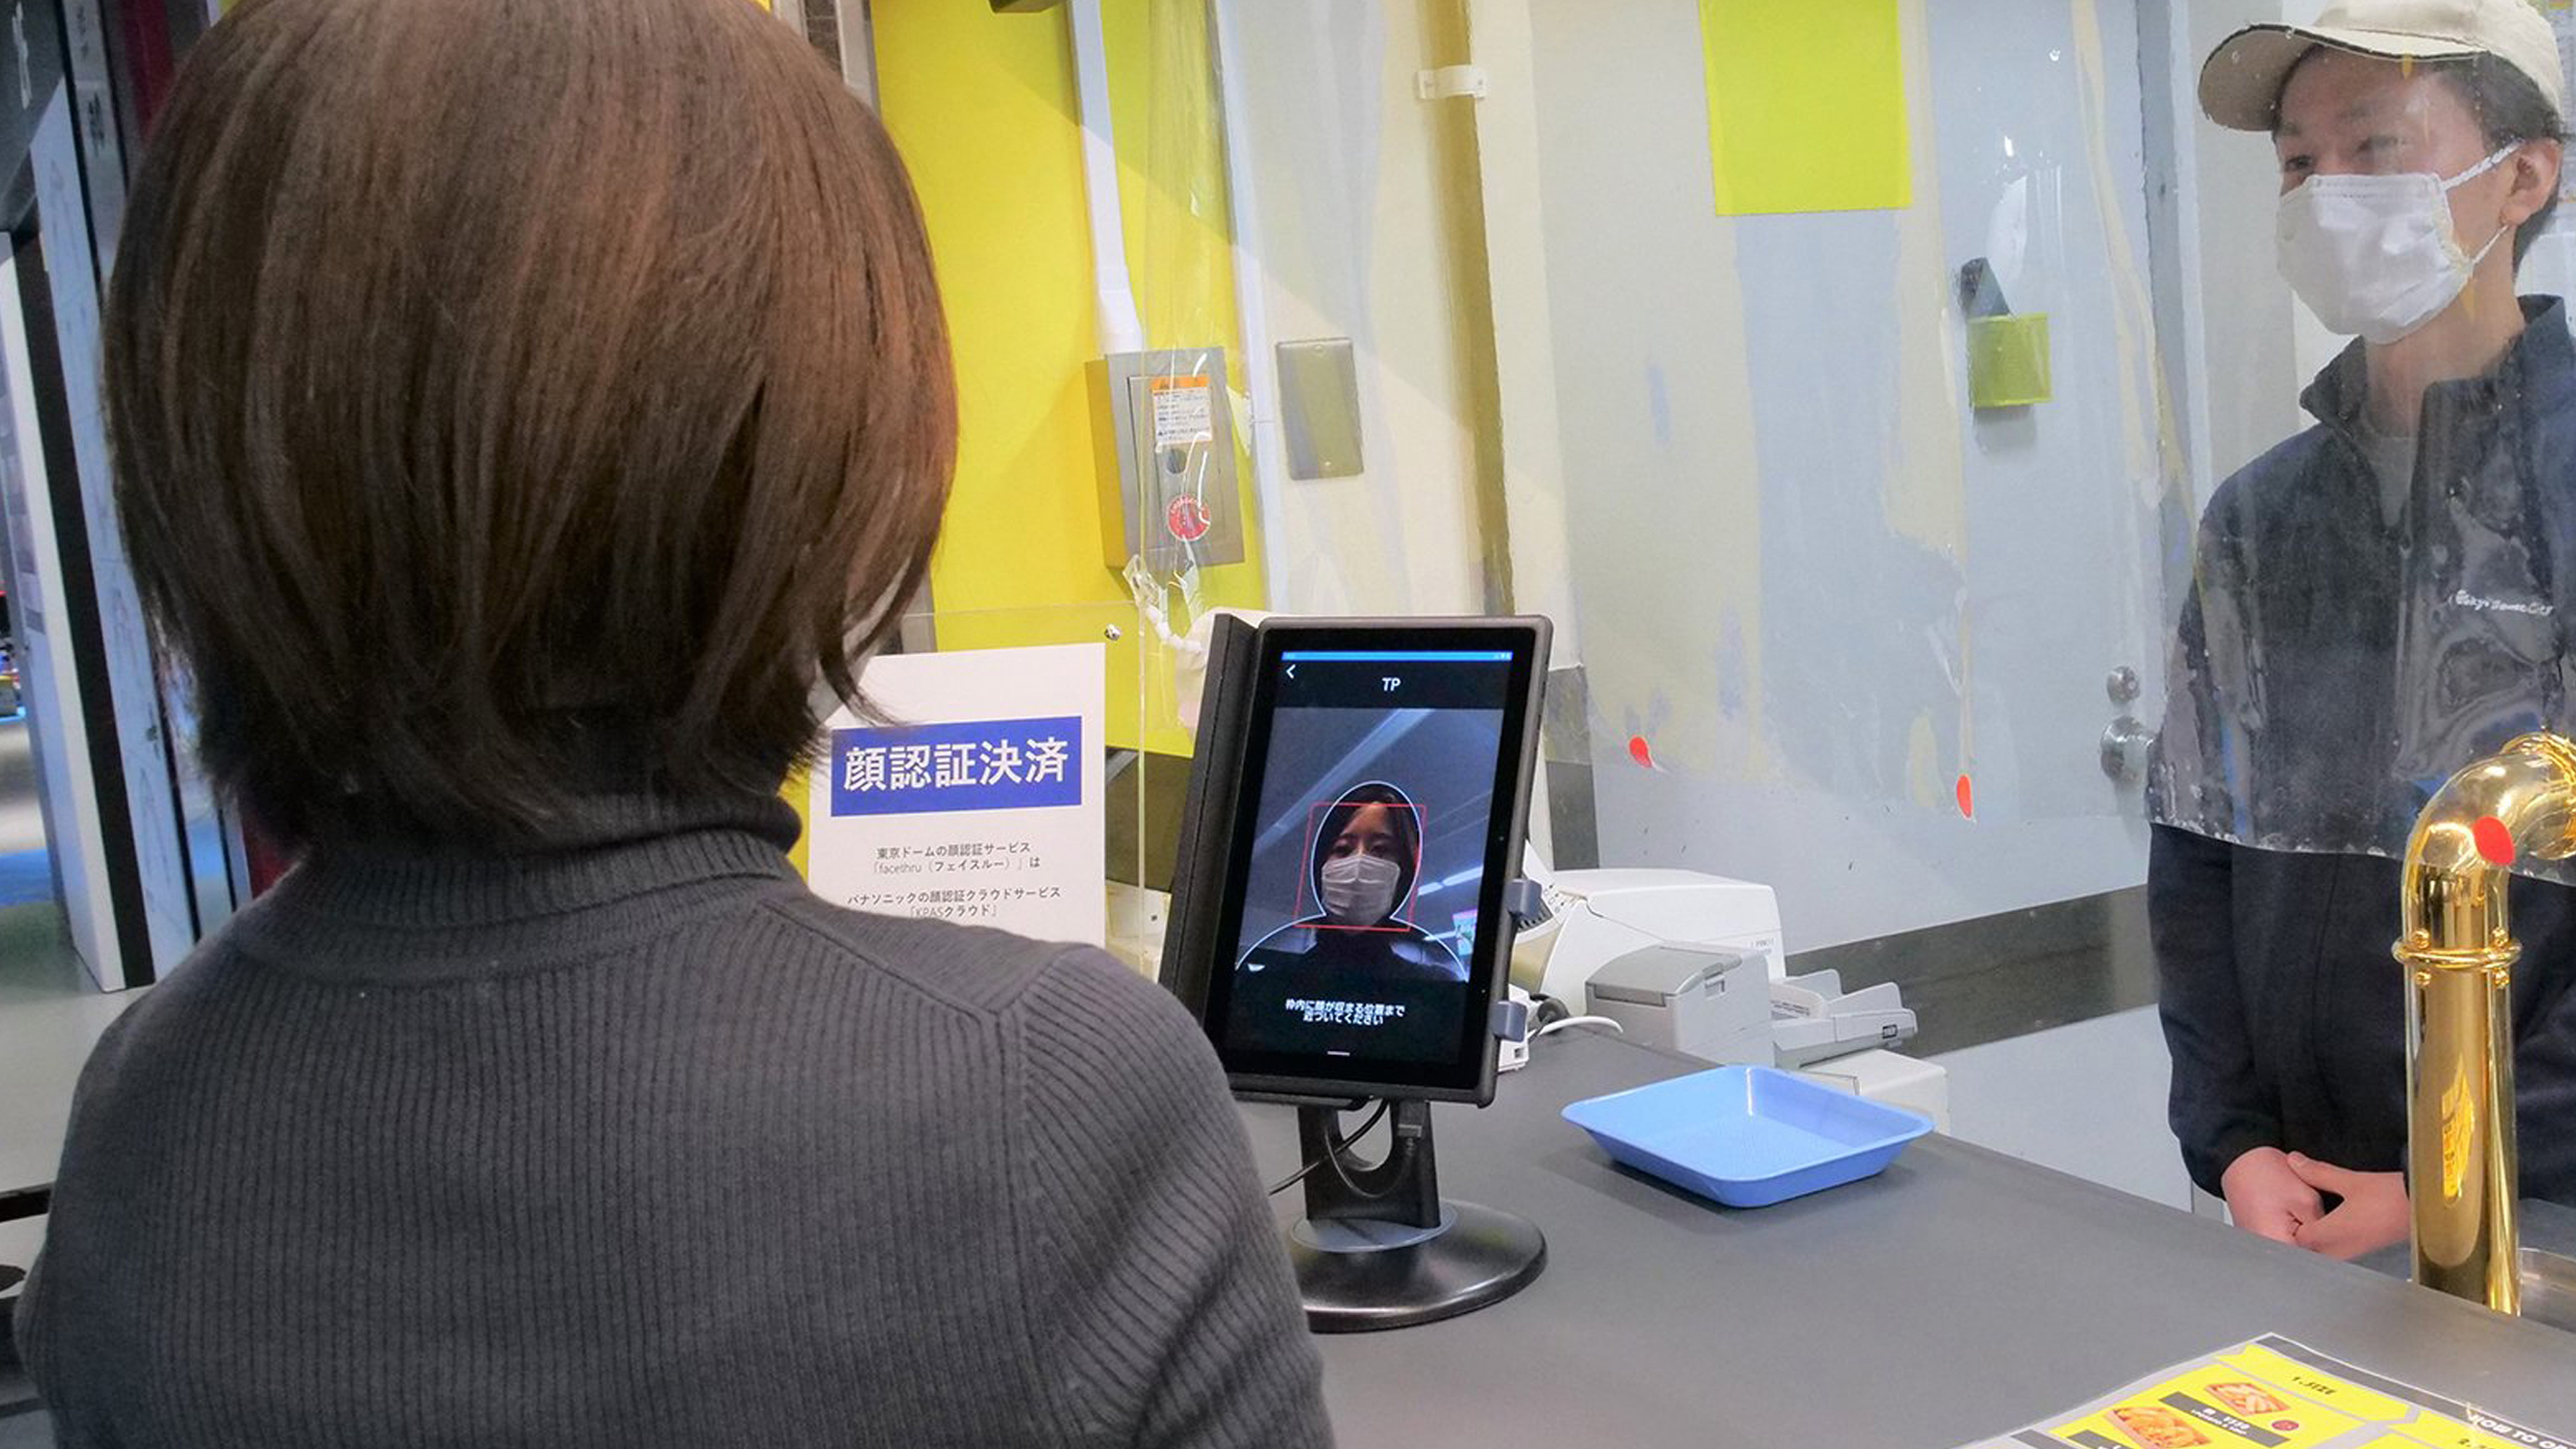 Facial recognition admission and payment services